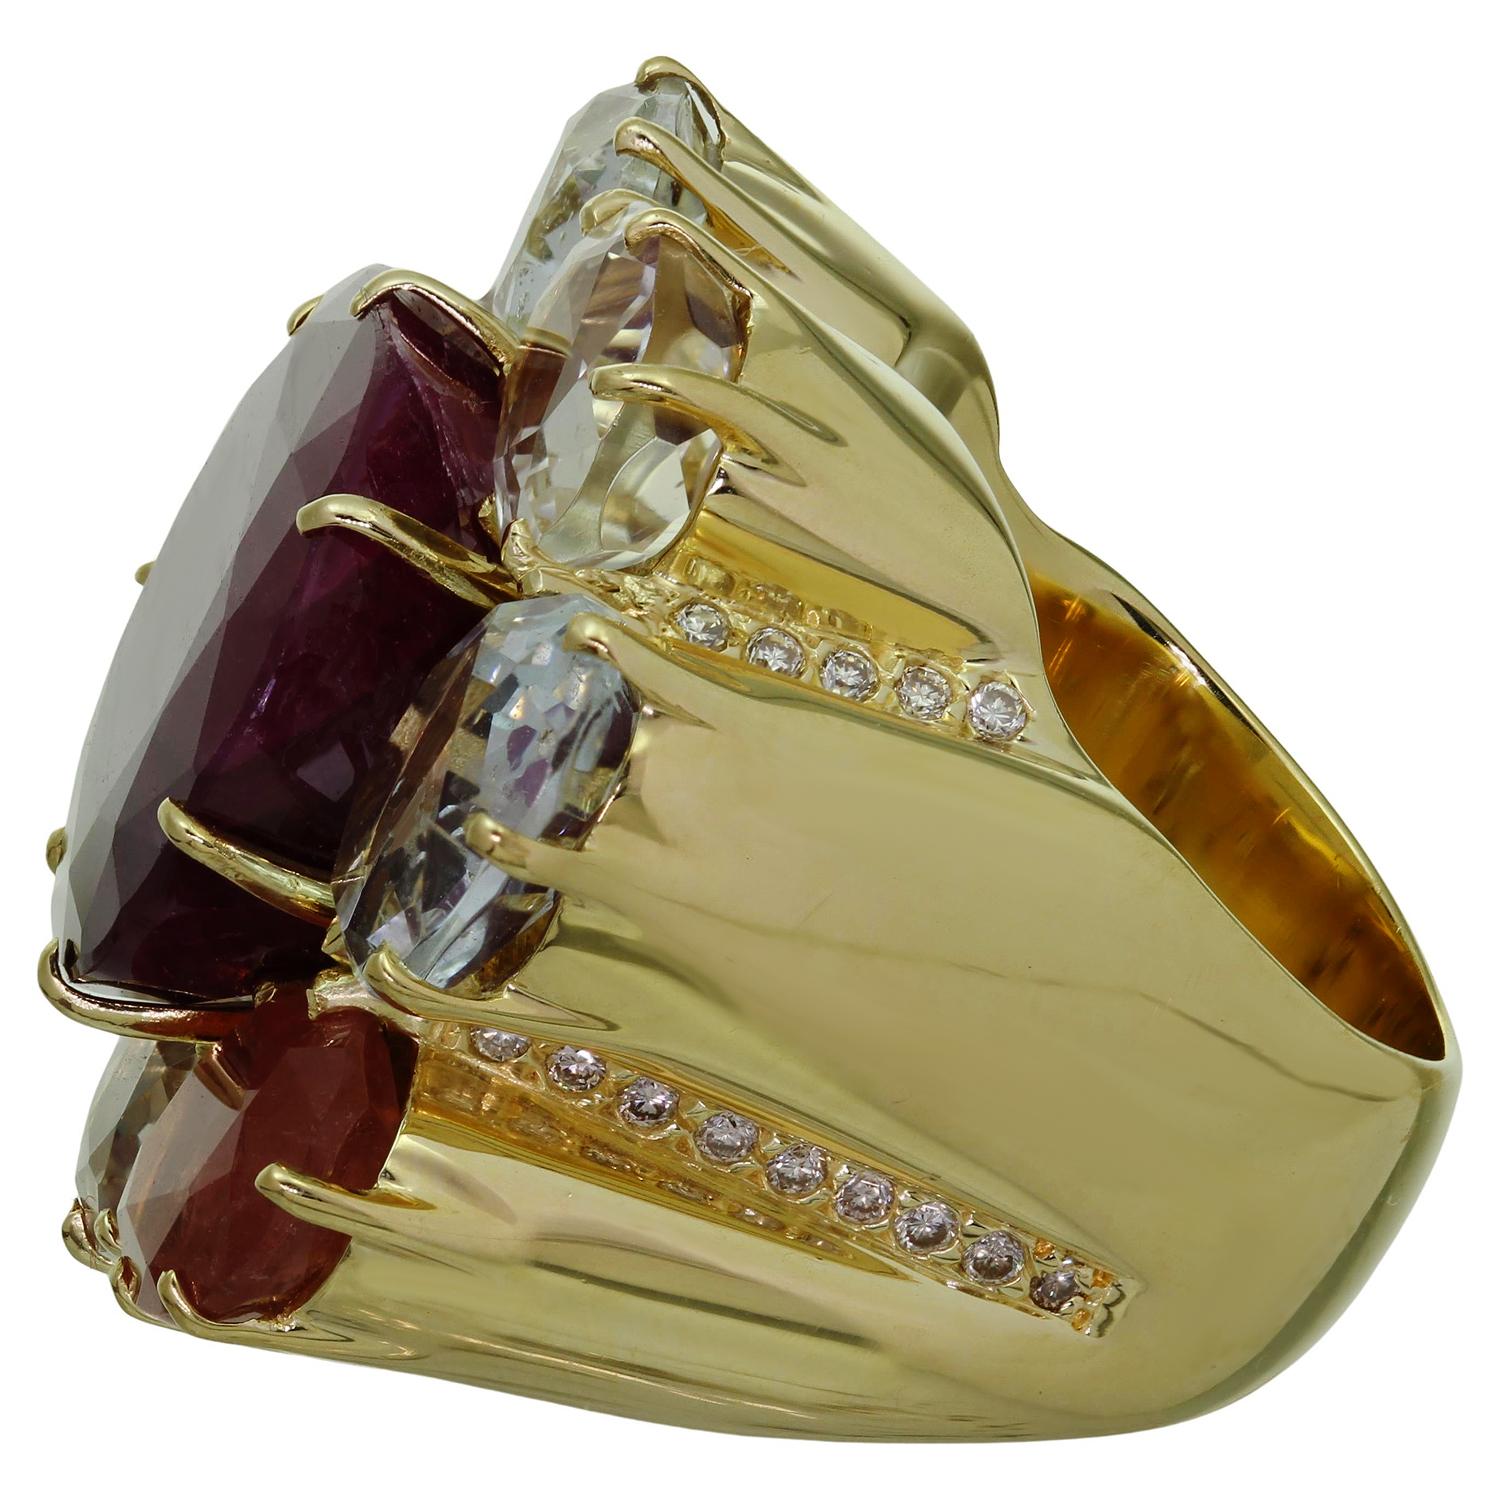 This gorgeous H. Stern ring from the Harmony collection for Diane Von Furstenberg is crafted in 18k yellow gold and set with ruby, tourmaline, aquamarine and citrine gemstones and 36 round brilliant F-G VS1-VS2 diamonds weighing an estimated 0.70